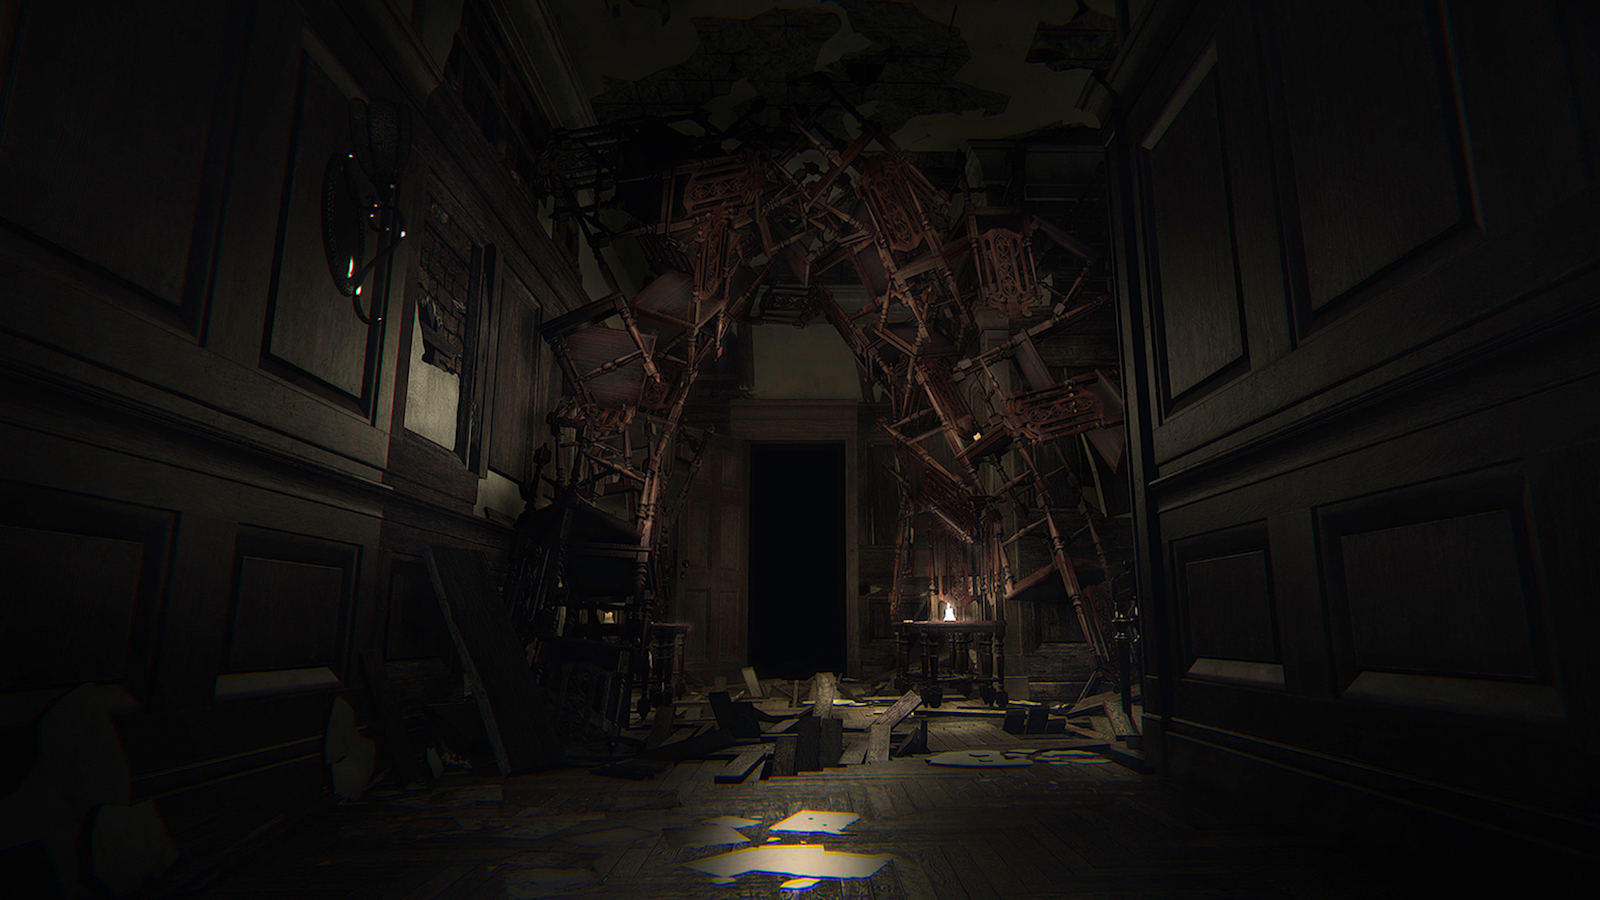 jumping all around layers of fear download